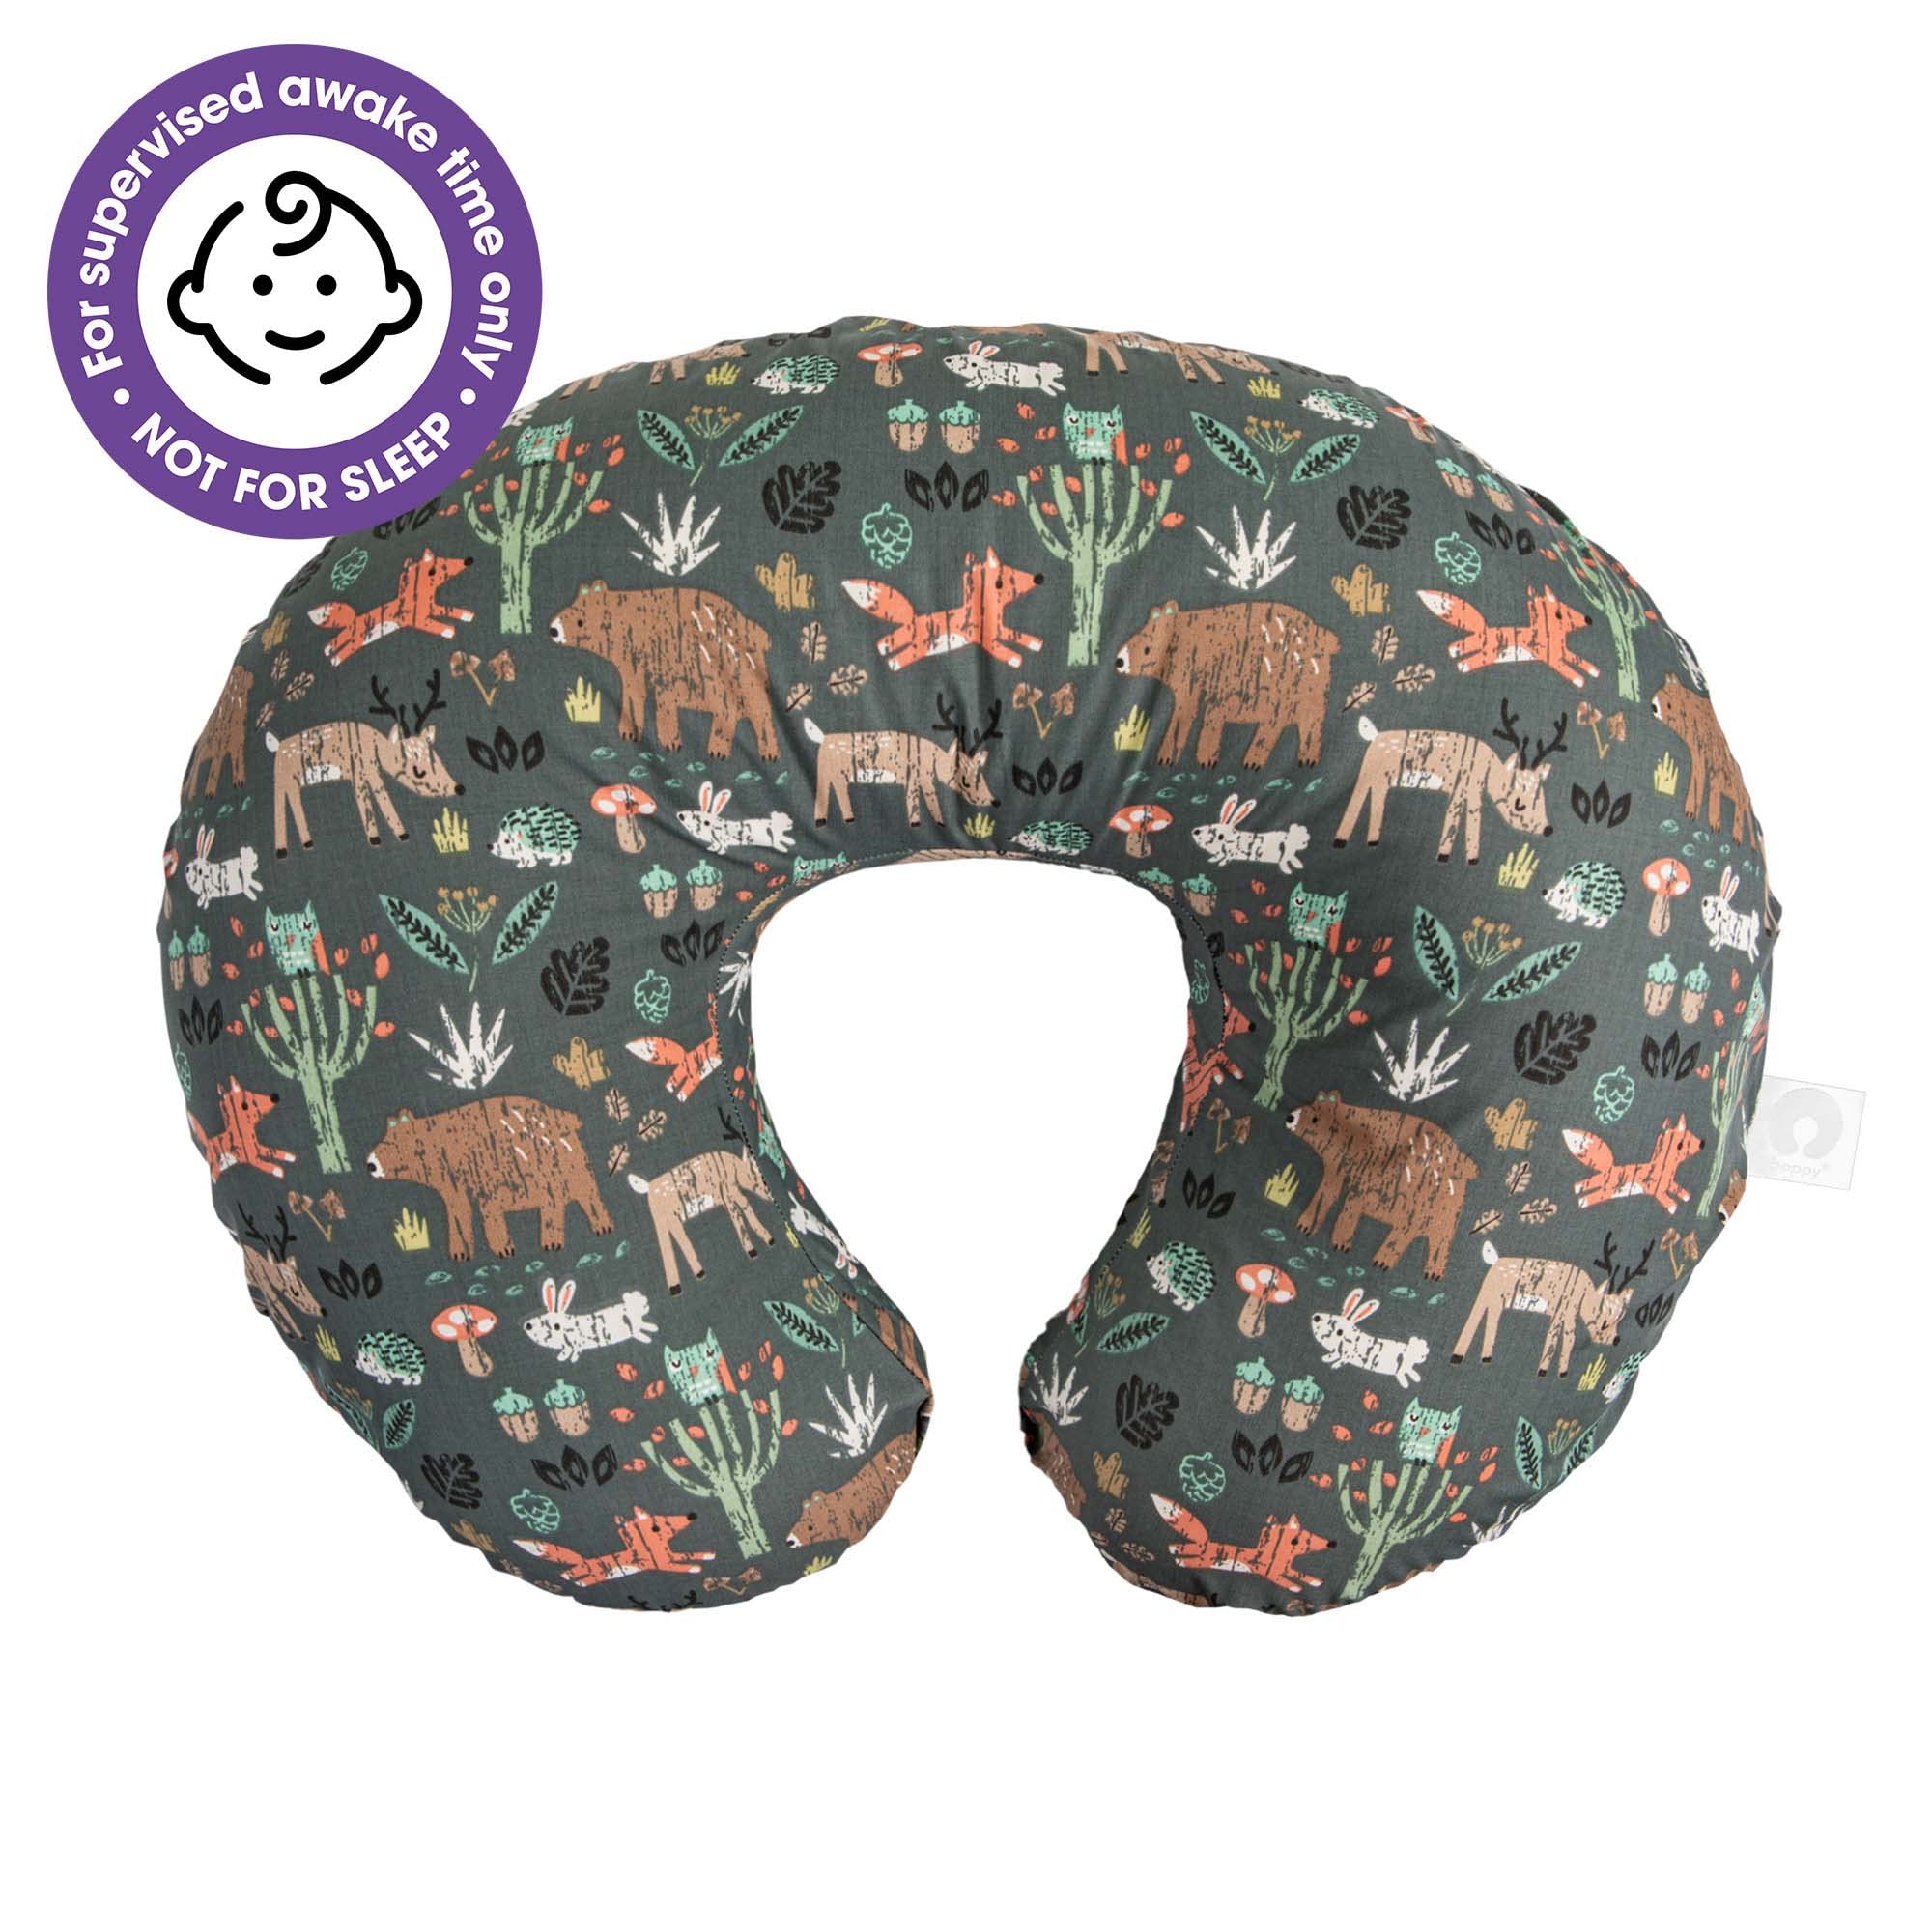 Boppy Nursing Pillow Original Support, Green Forest Animals, Ergonomic Nursing Essentials for Bottle and Breastfeeding, Firm Fiber Fill, with Removable Nursing Pillow Cover, Machine Washable